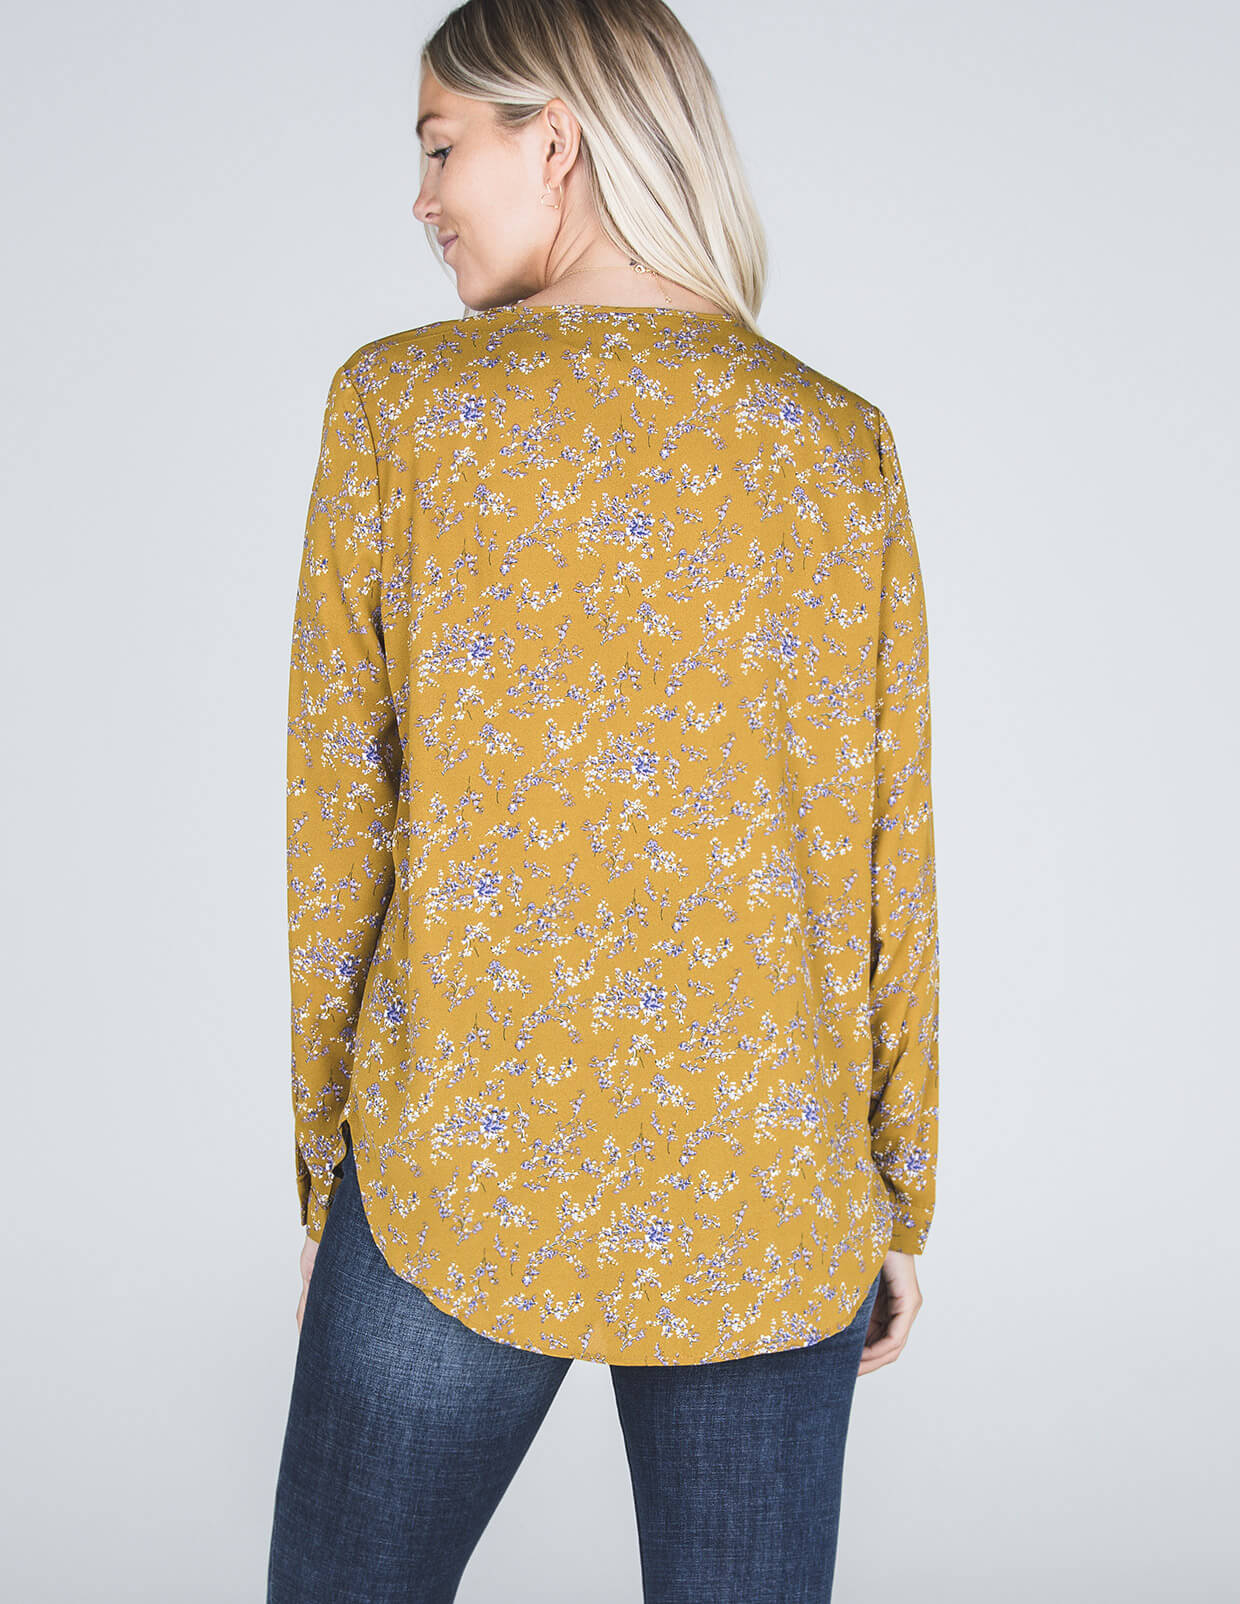 Silver Icing Name It to Win It: Floral Blouse